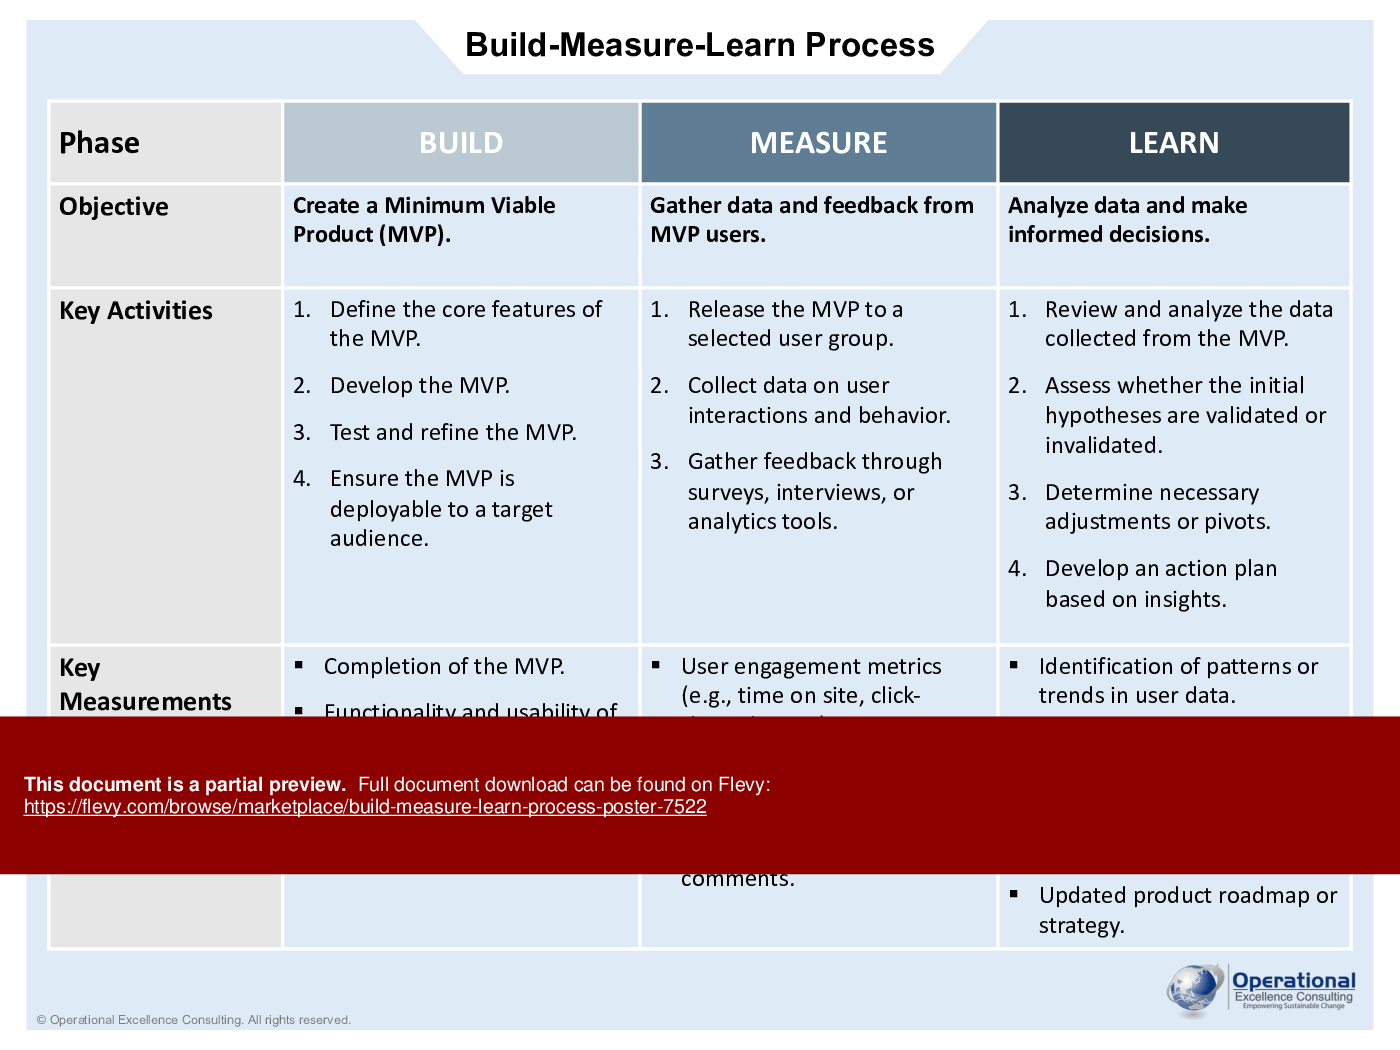 Build-Measure-Learn Process Poster (5-page PDF document) Preview Image